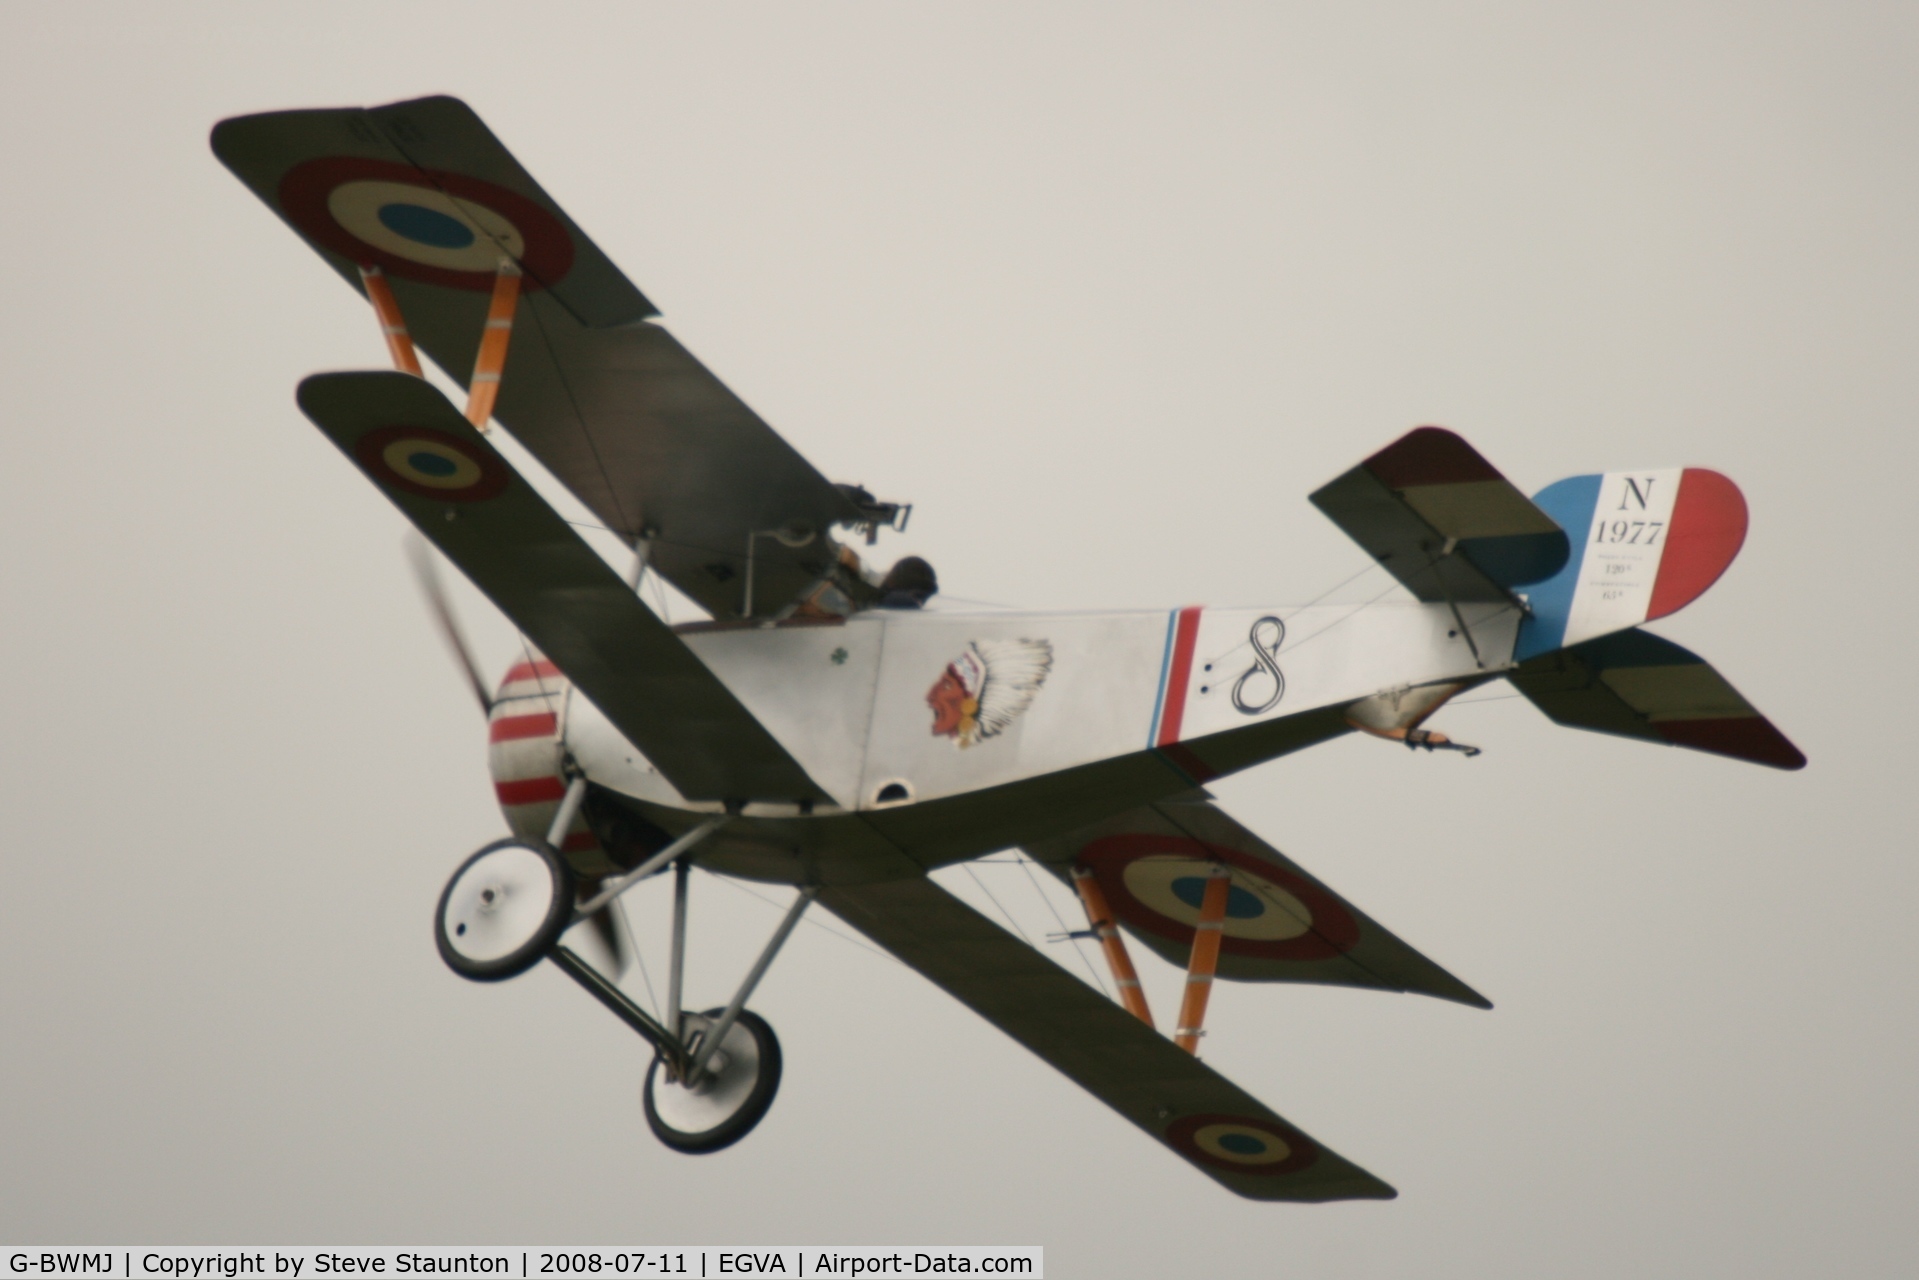 G-BWMJ, 1981 Nieuport 17 Scout Replica C/N PFA 121-12351, Taken at the Royal International Air Tattoo 2008 during arrivals and departures (show days cancelled due to bad weather)